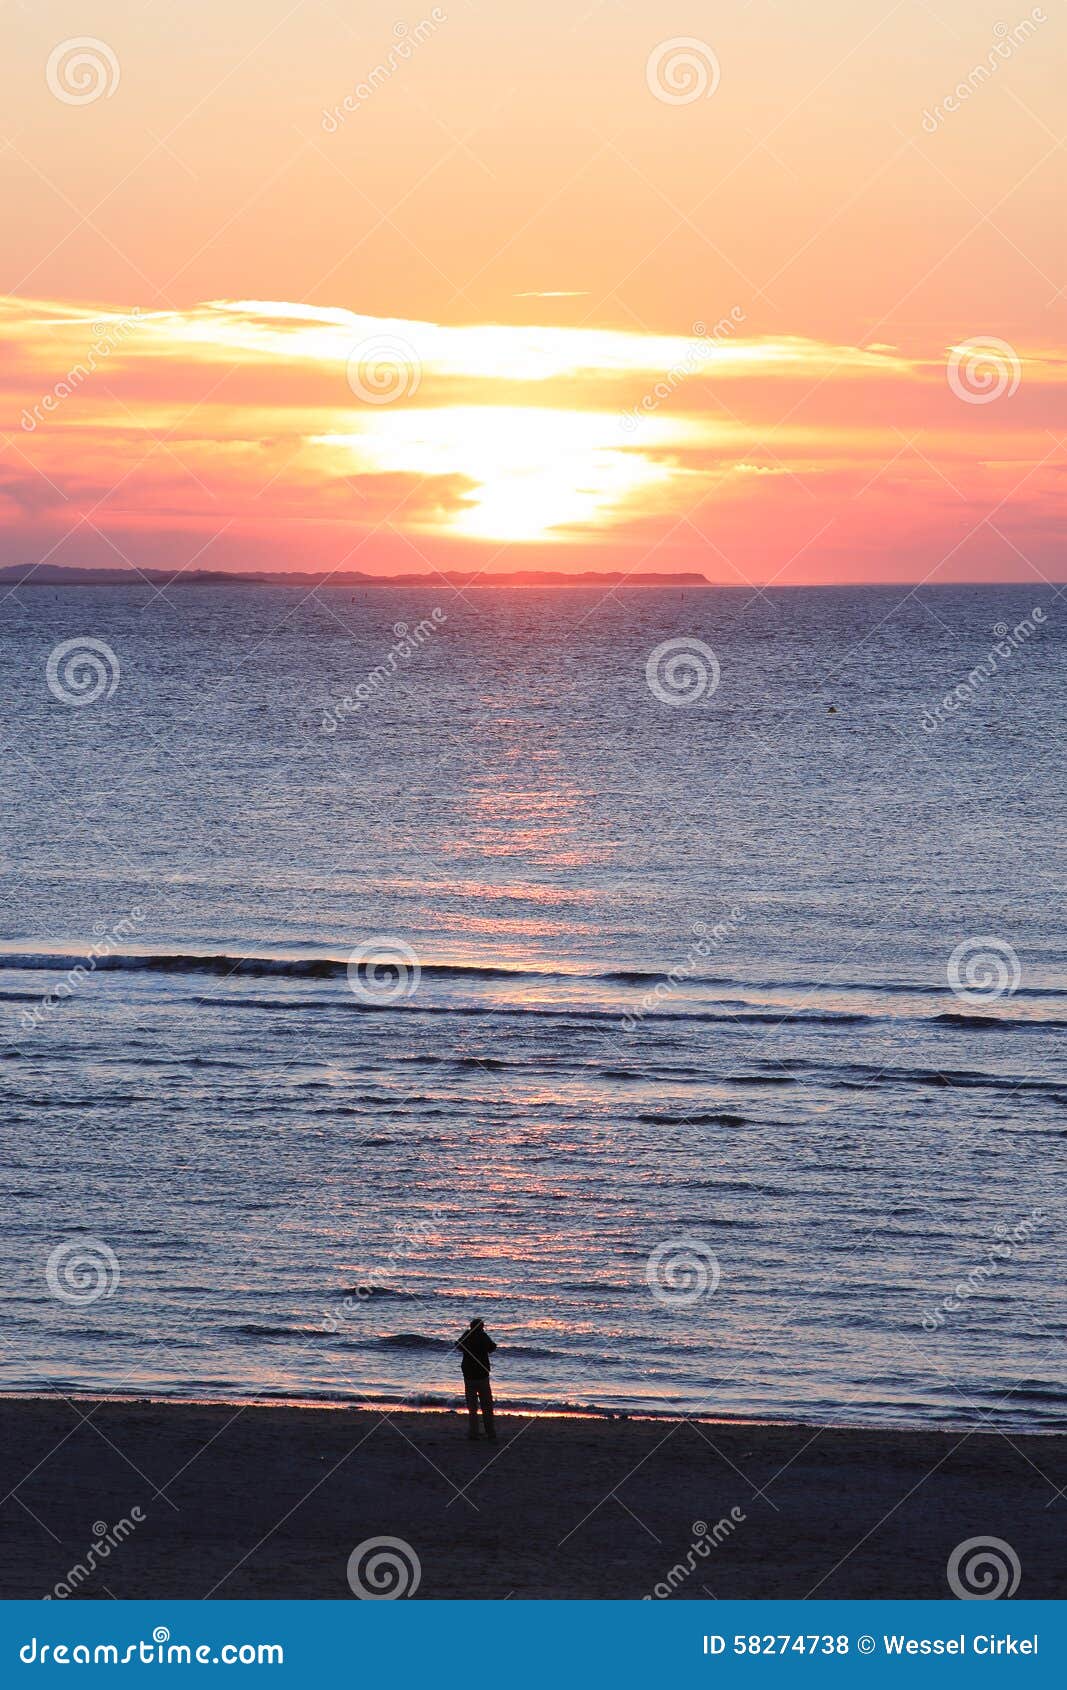 lonely person looking at sunset, dutch ameland island